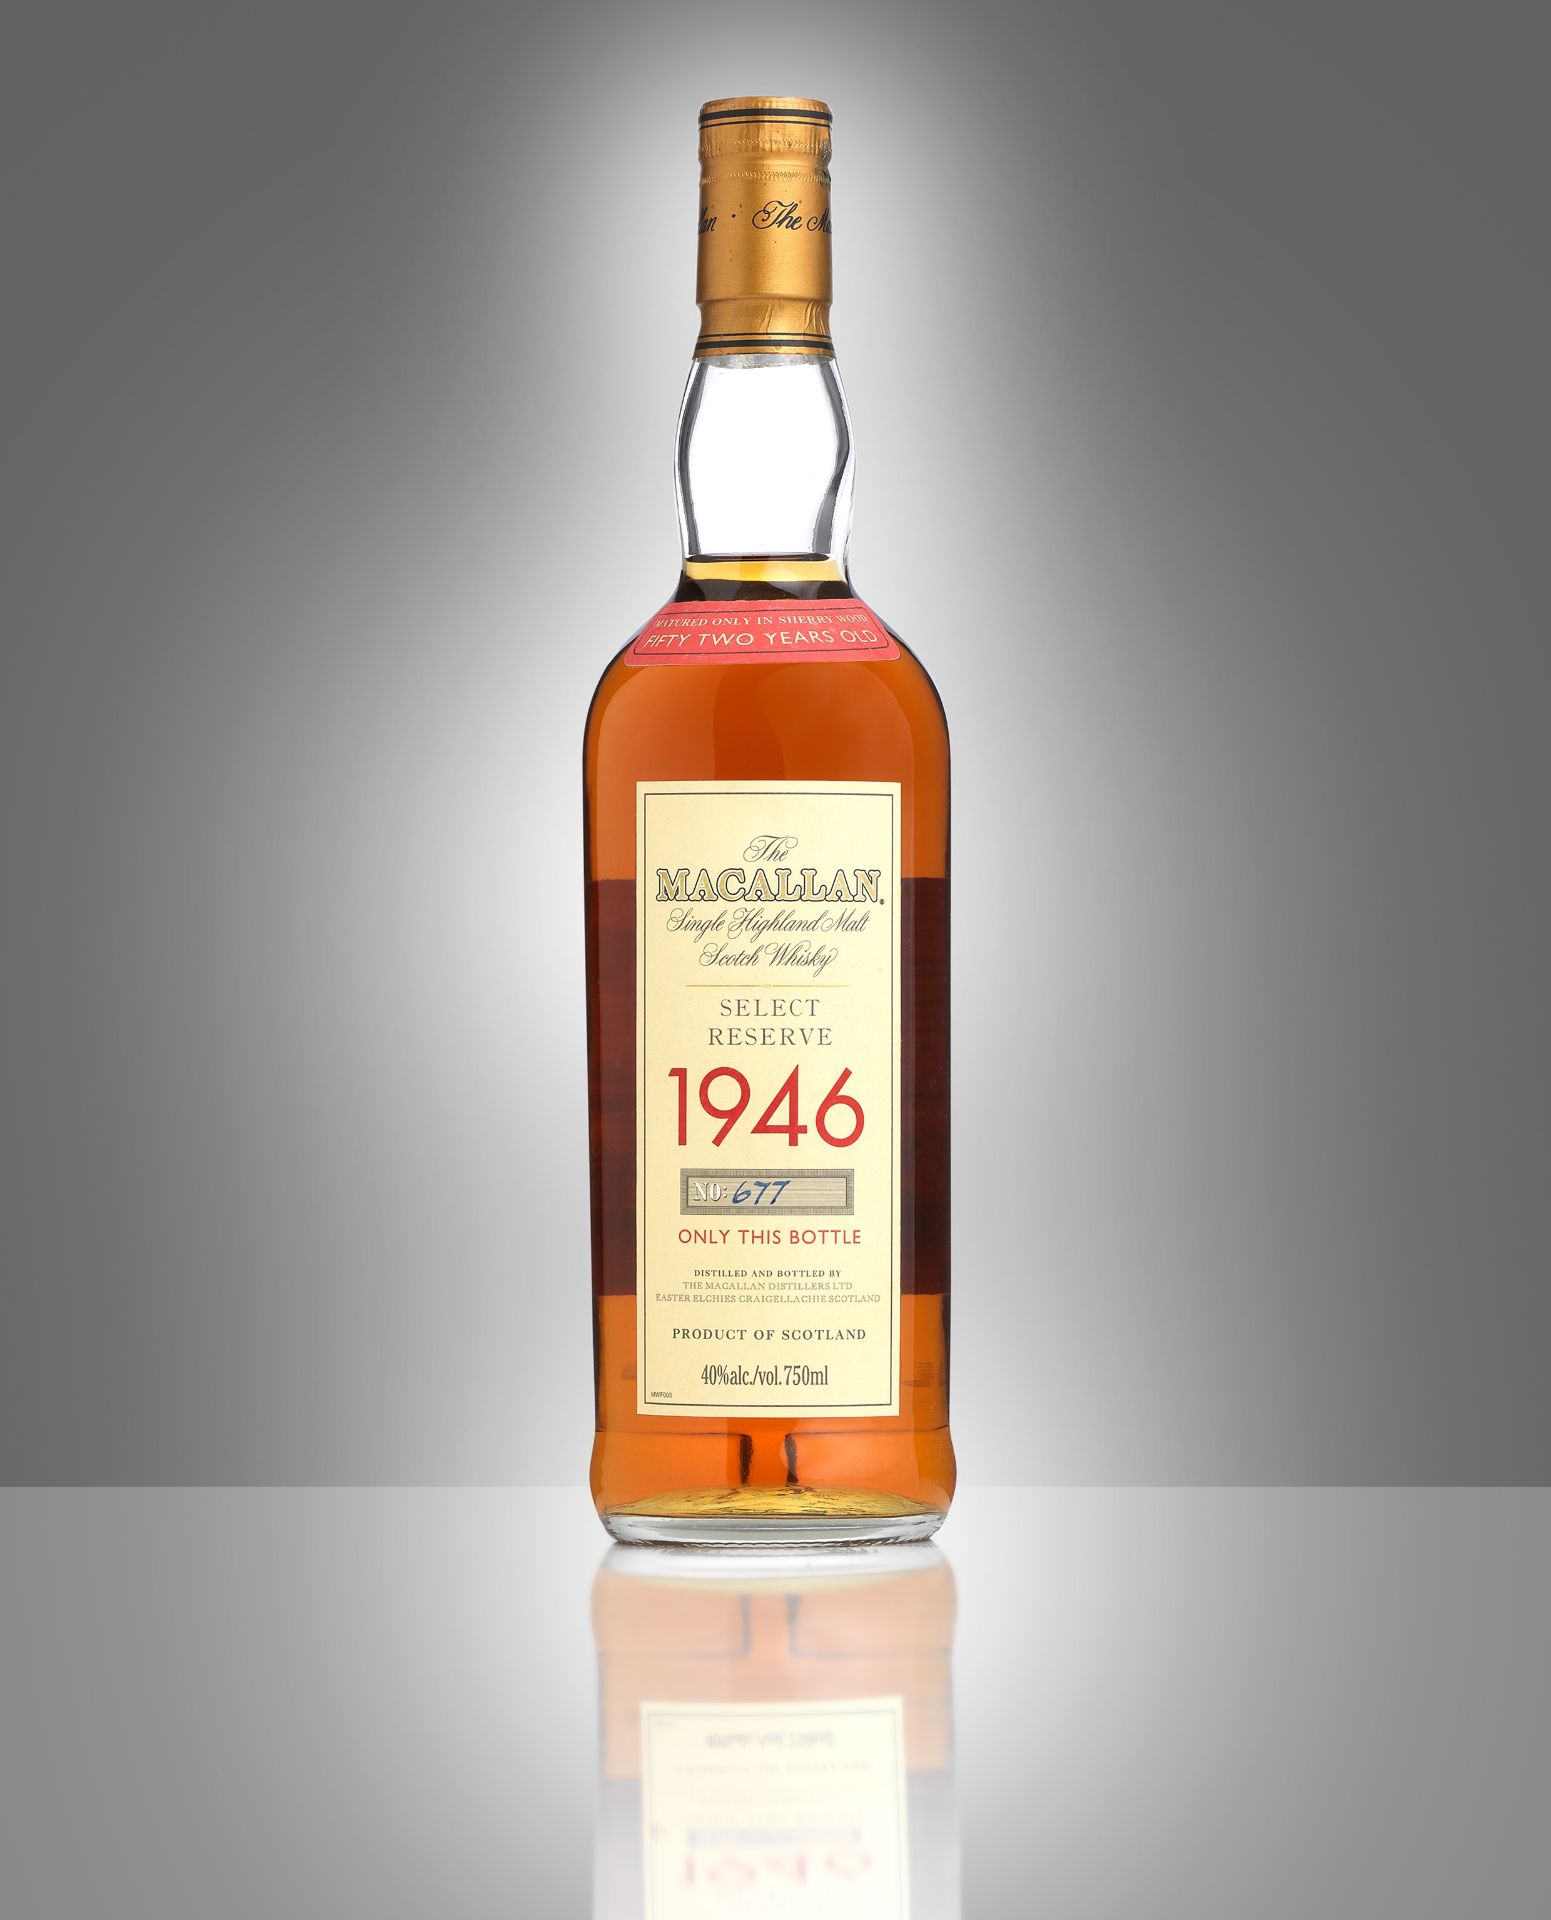 The Macallan Select Reserve-52 year old-1946 - Image 2 of 2